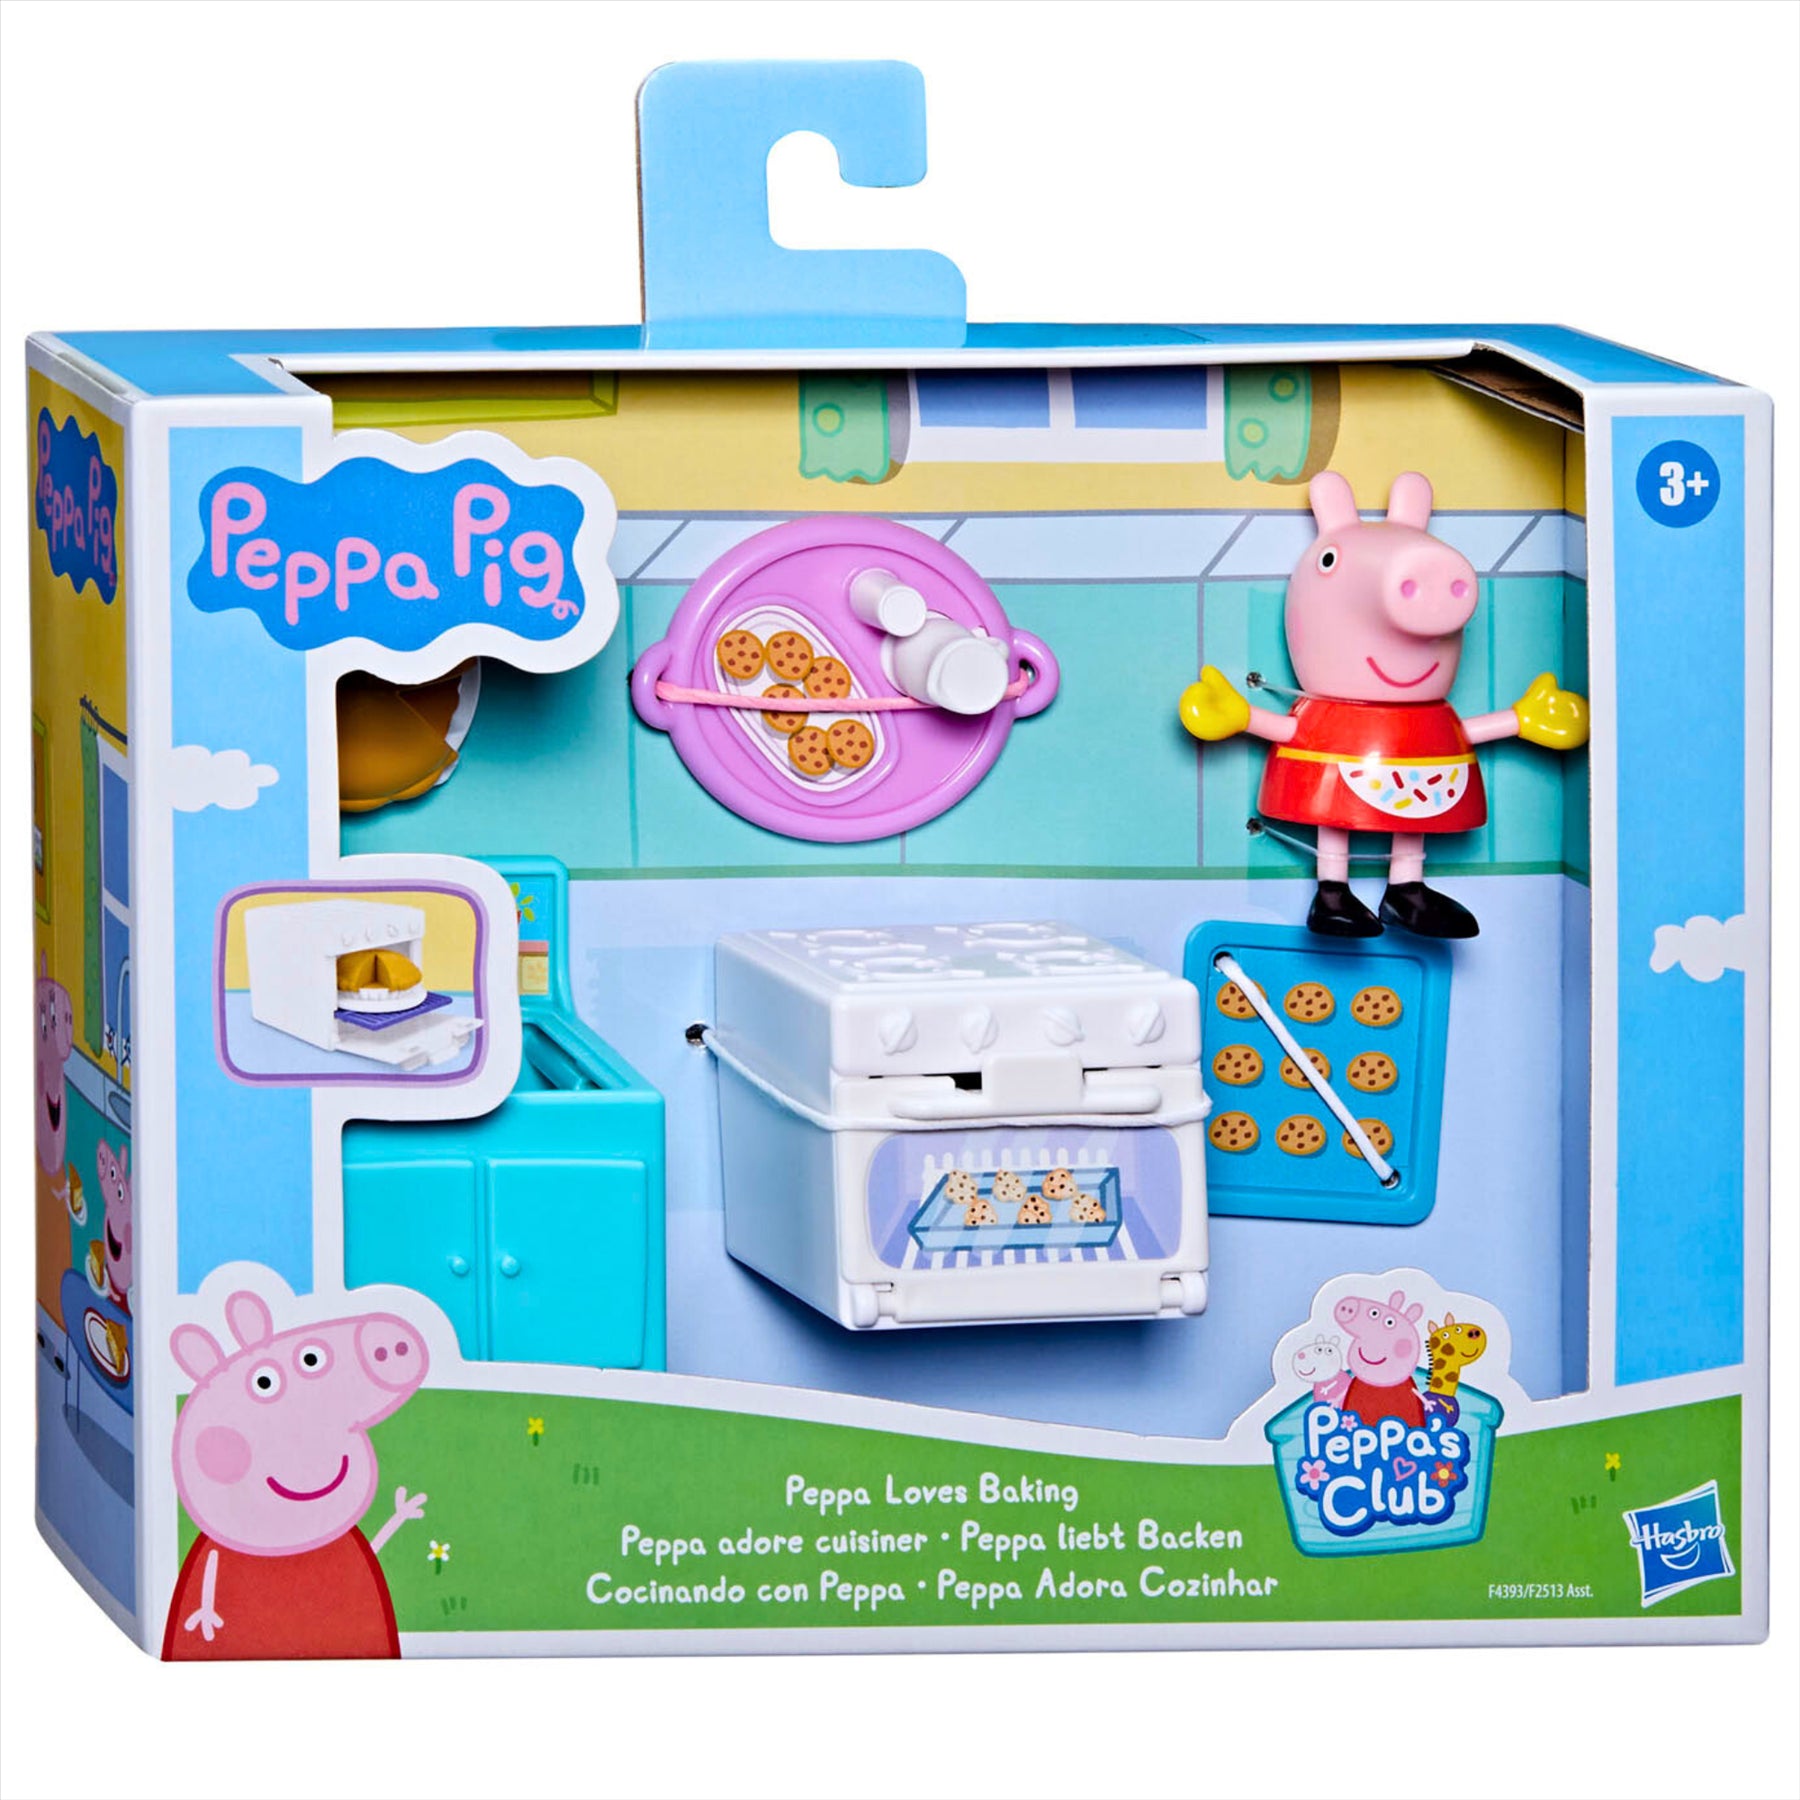 Peppa Pig Peppa Loves Baking Toy Playset with Figure and Accessories - Toptoys2u